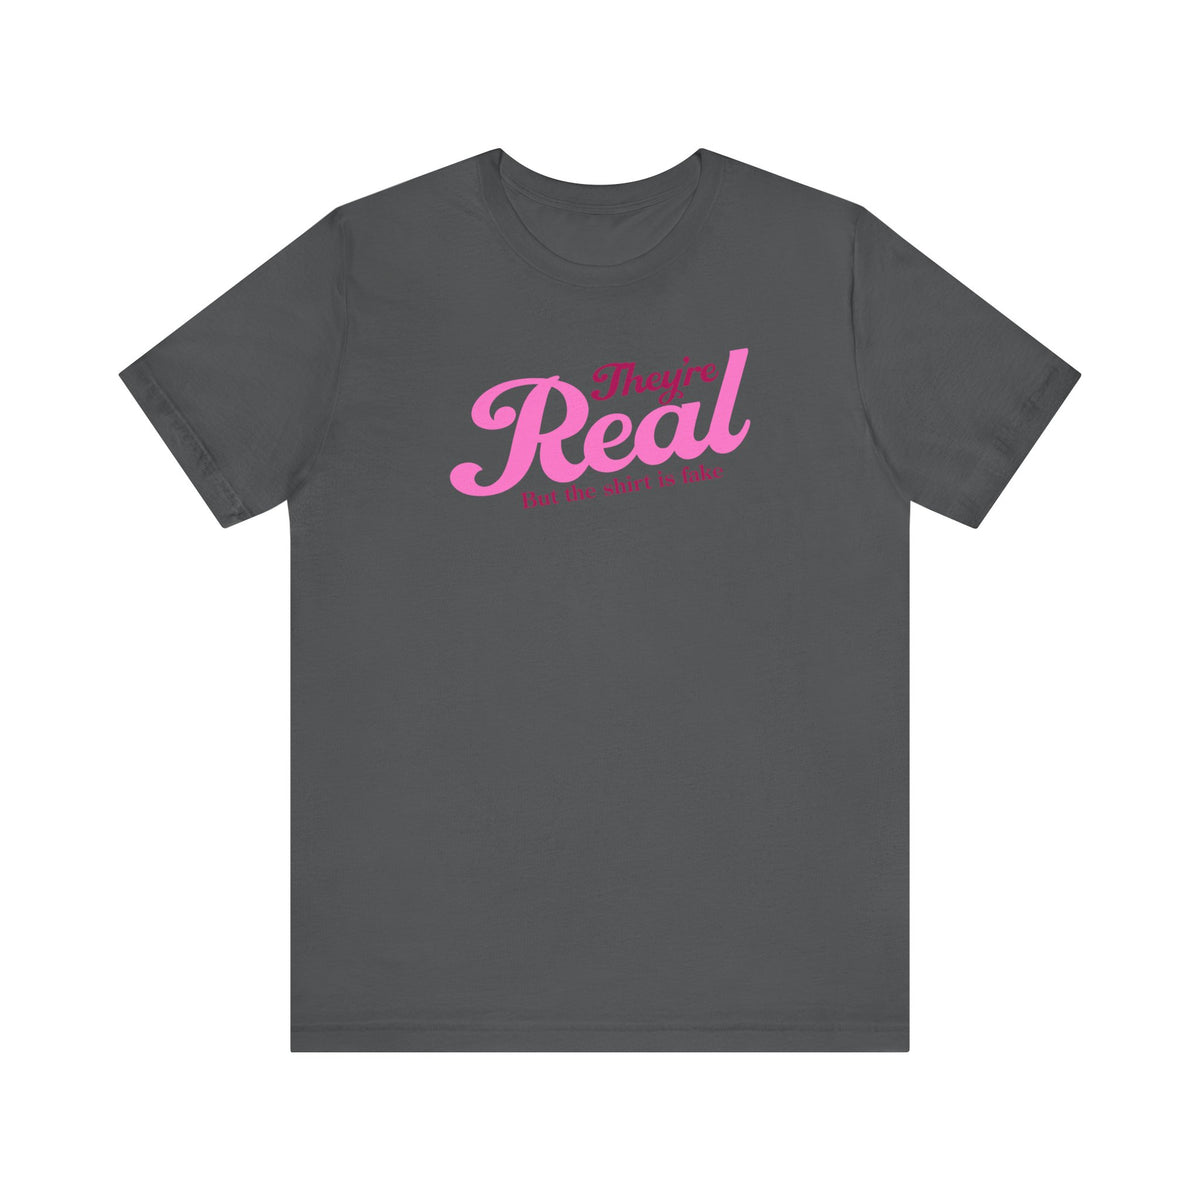 They're Real But The Shirt Is Fake - Men's T-Shirt